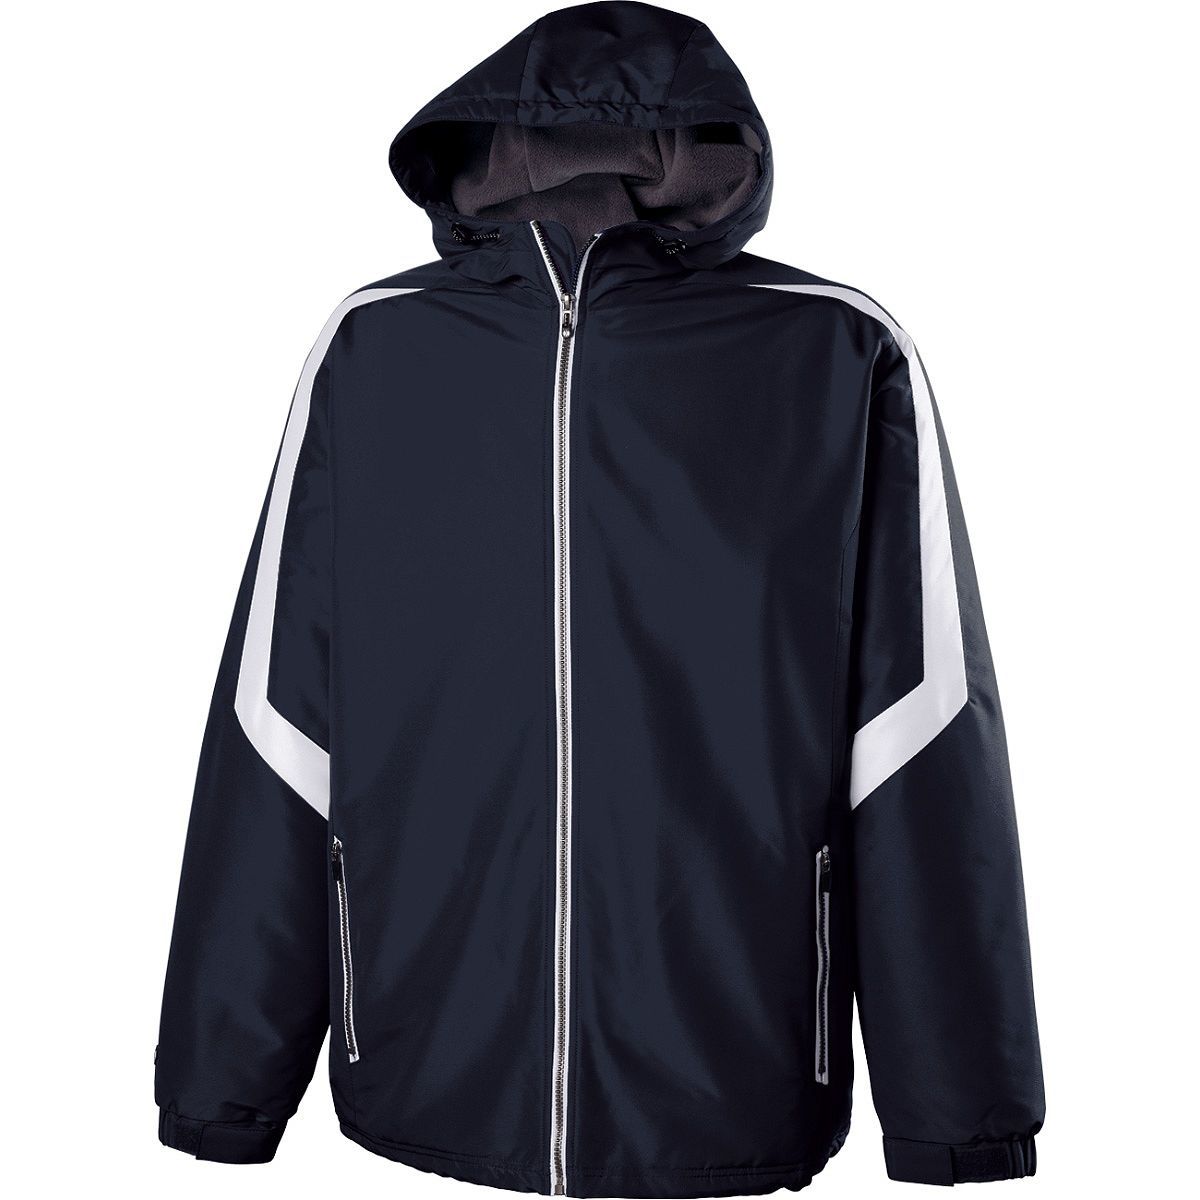 Holloway Sportswear 4XL Charger Jacket Navy/White 229059 - image 4 of 4